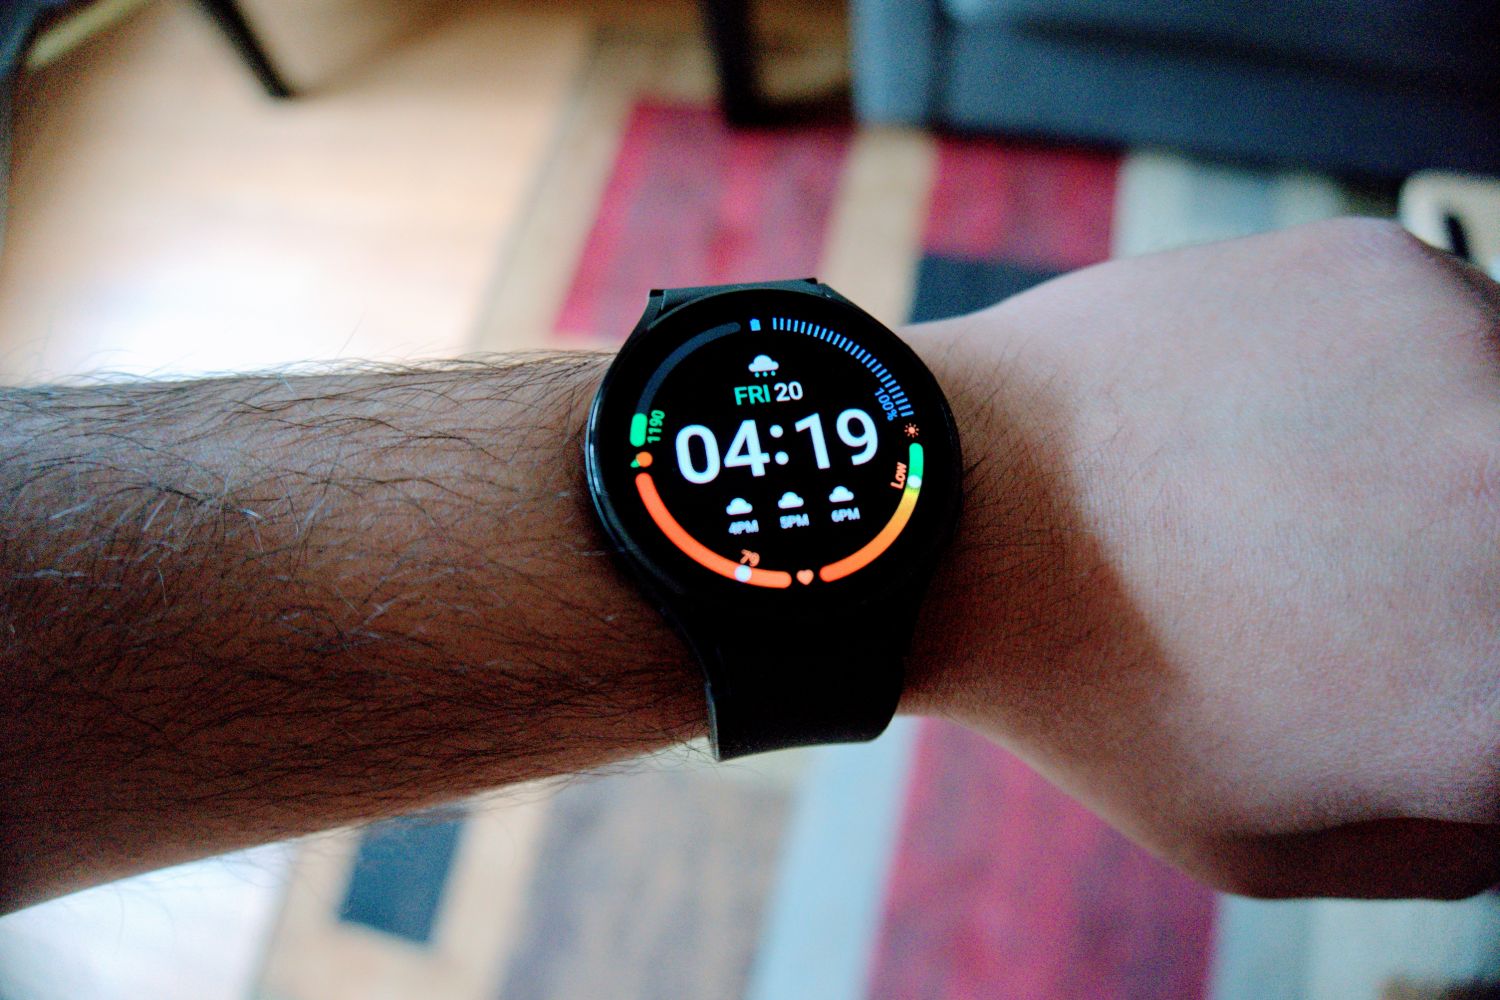 Samsung Galaxy Watch 4 Review: The Best for Smaller Wrists